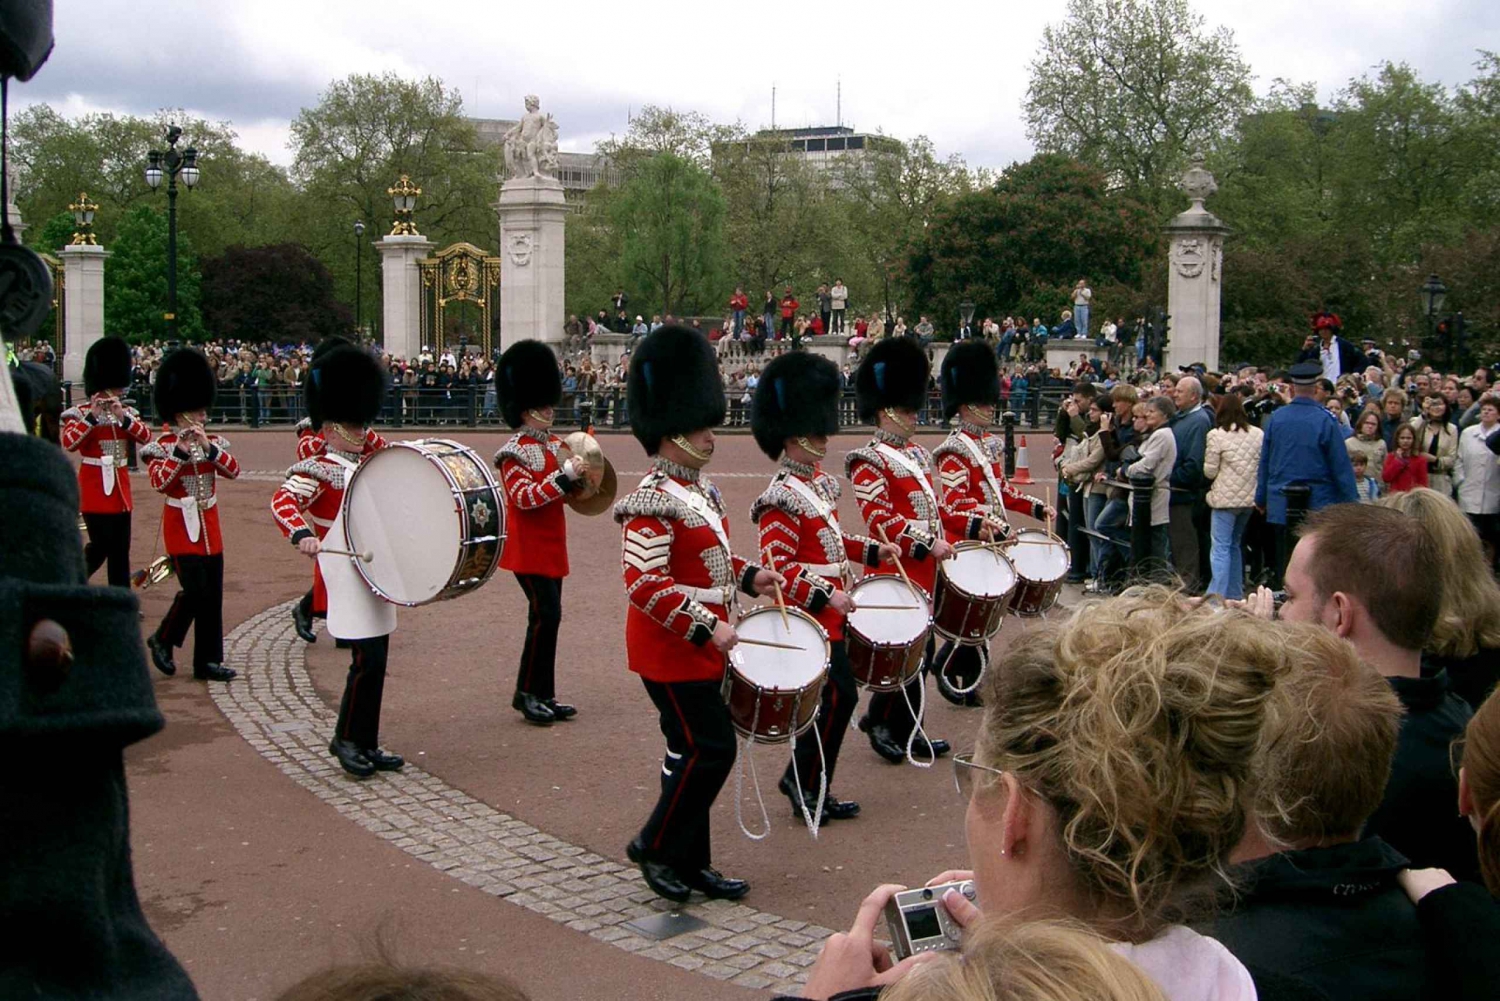 London: Buckingham Palace Changing of the Guard Guided Tour